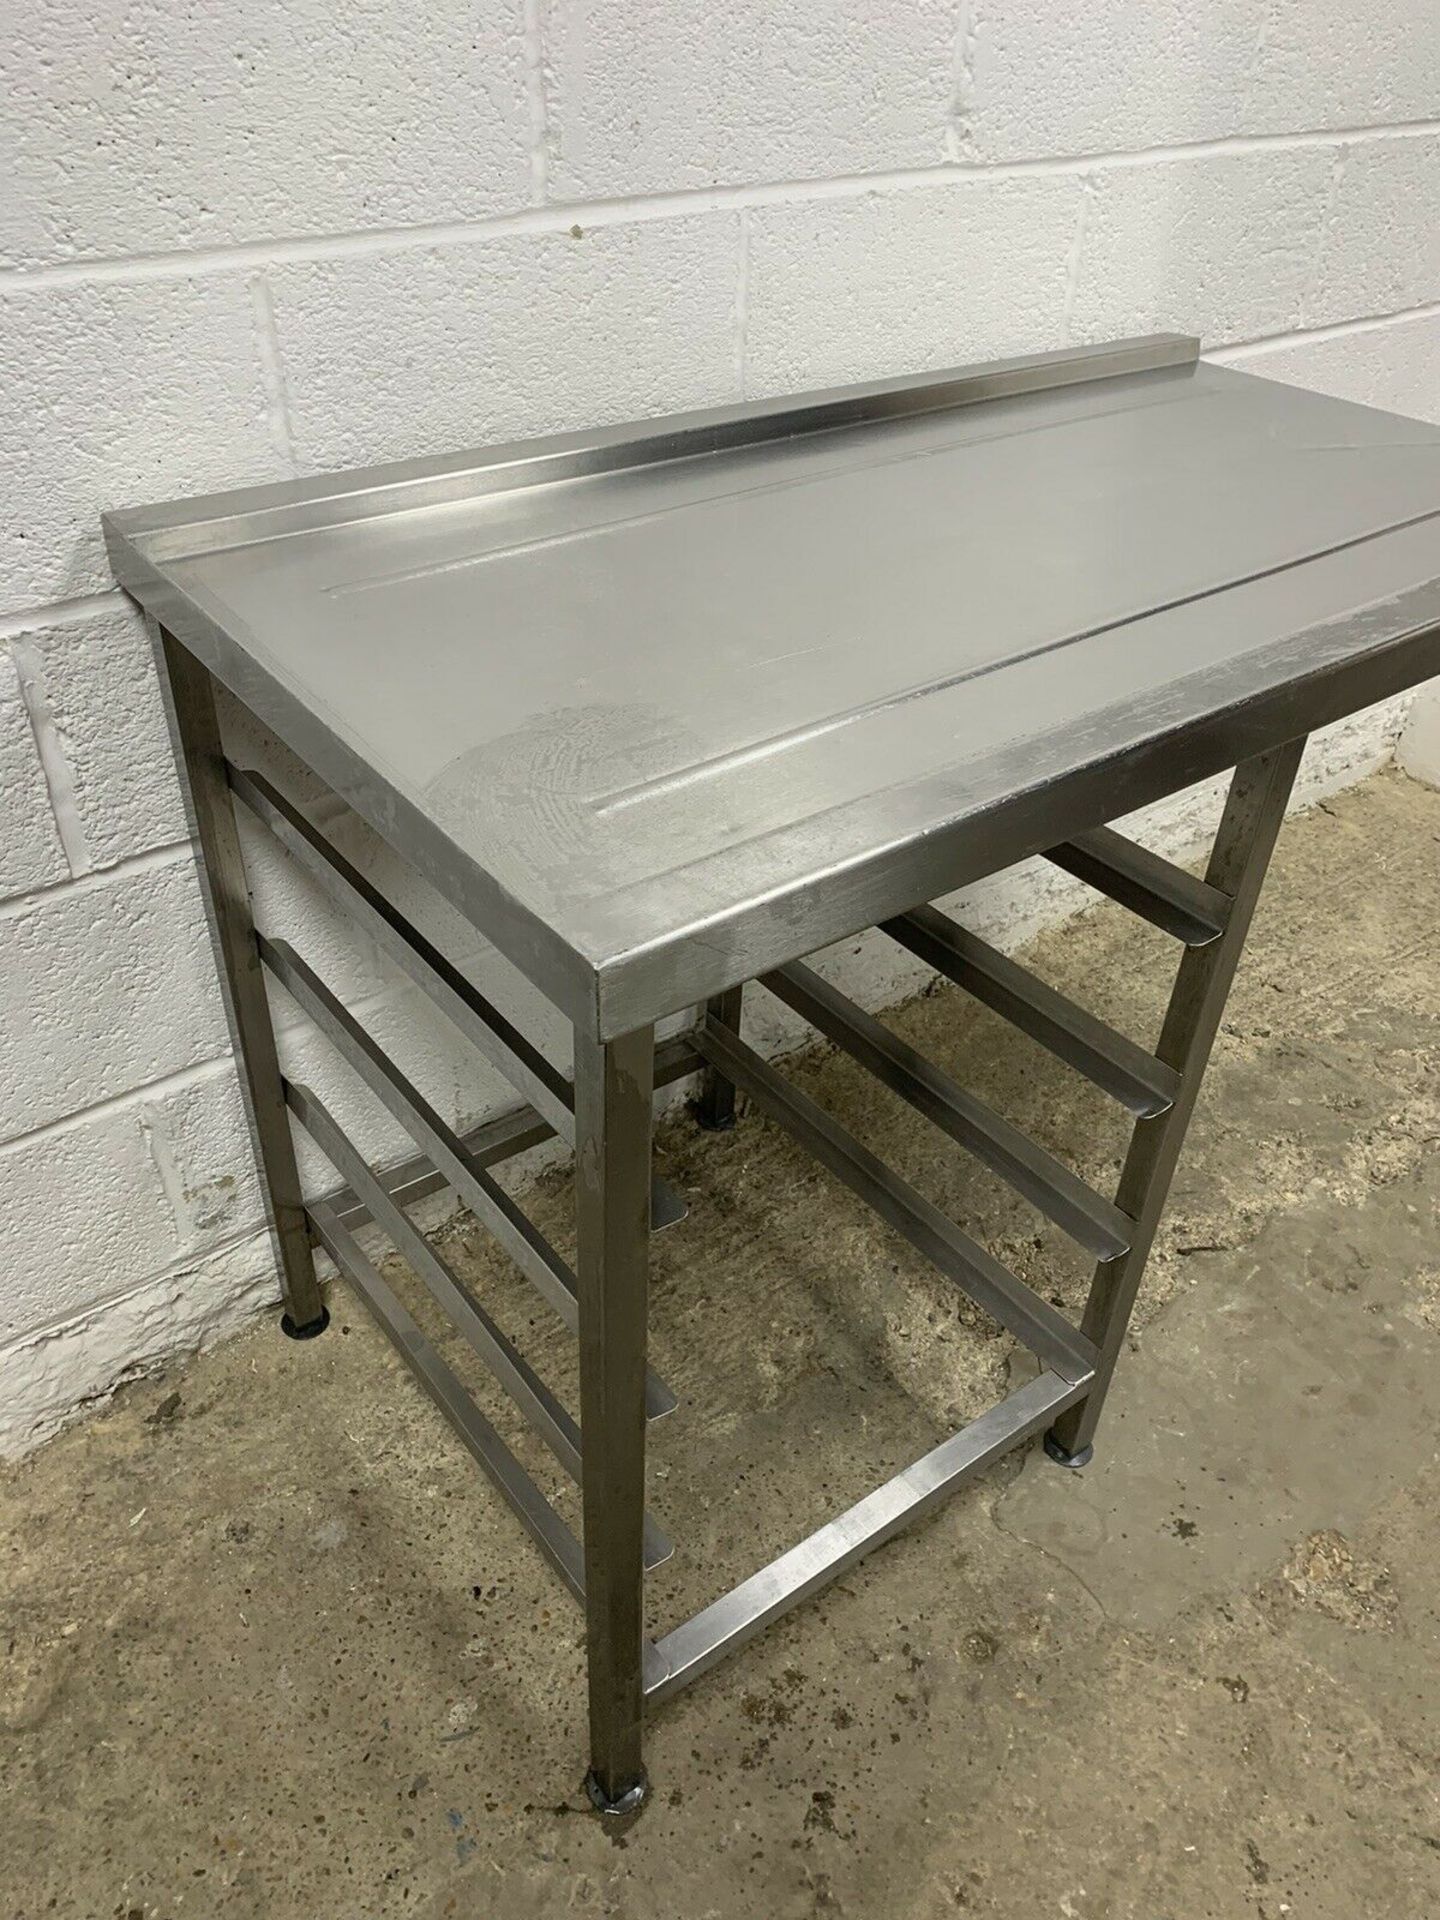 Stainless Steel Dishwasher Outlet / Exit Table